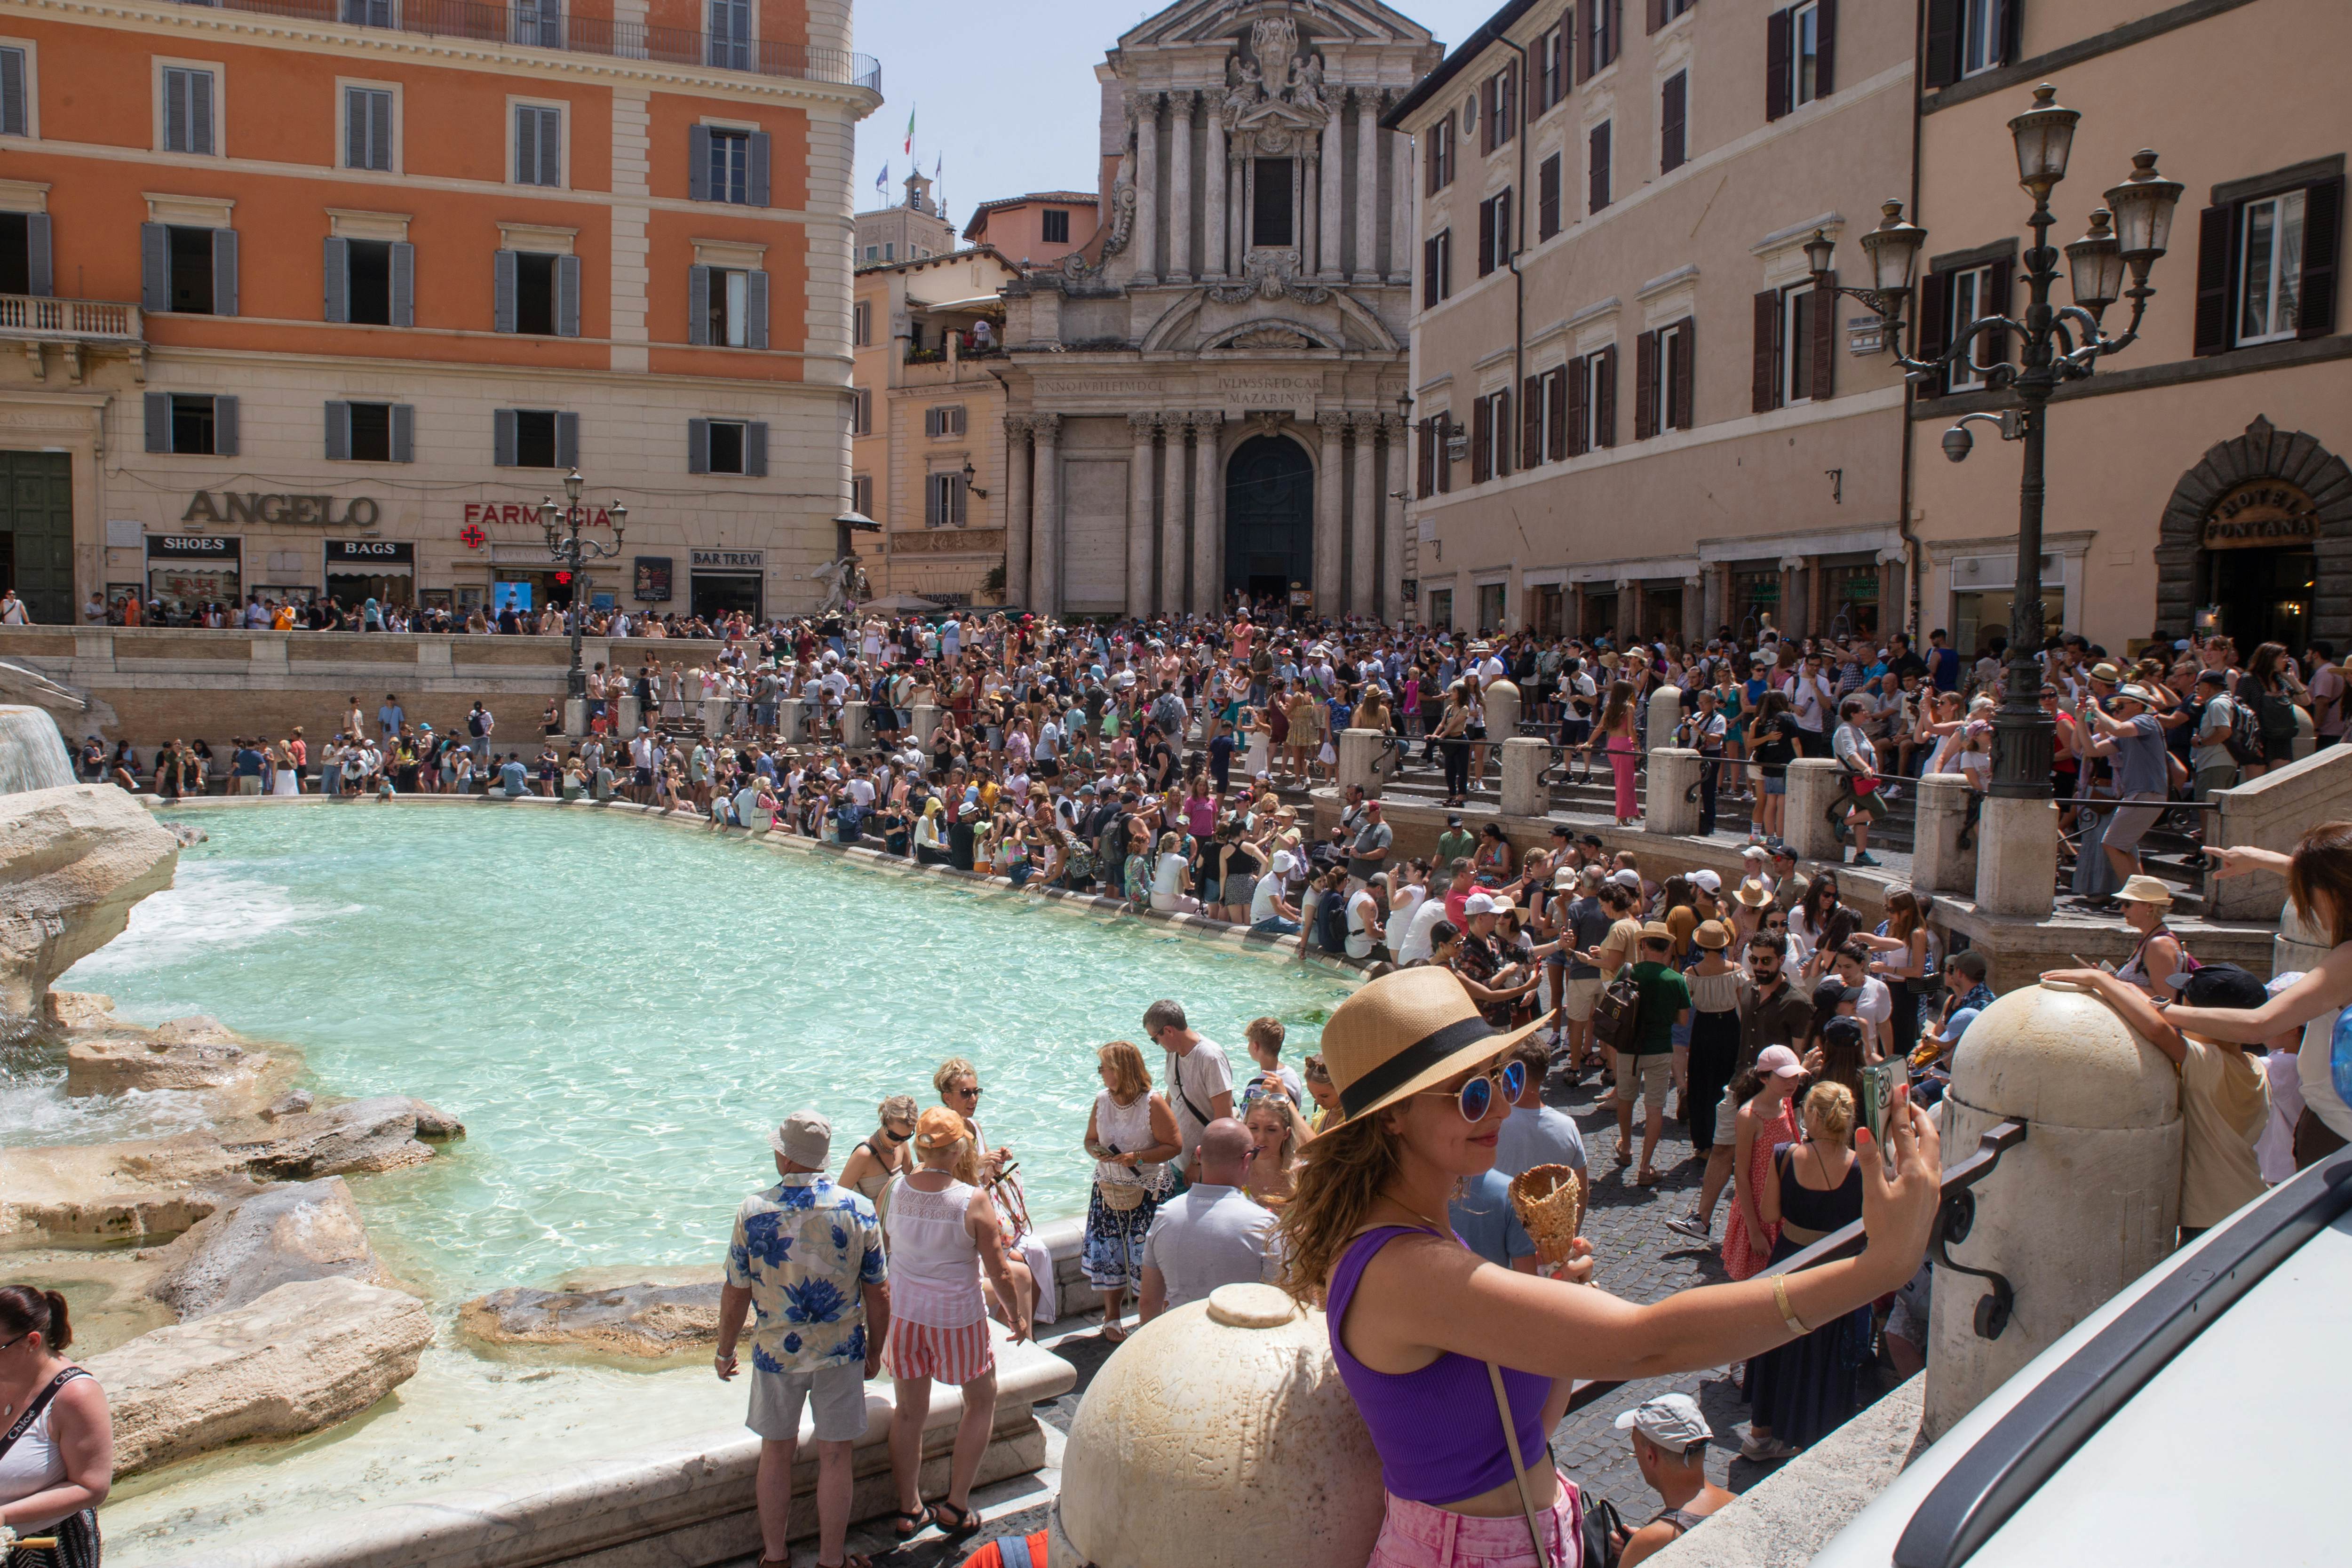 How Safe Is Rome for Travel?